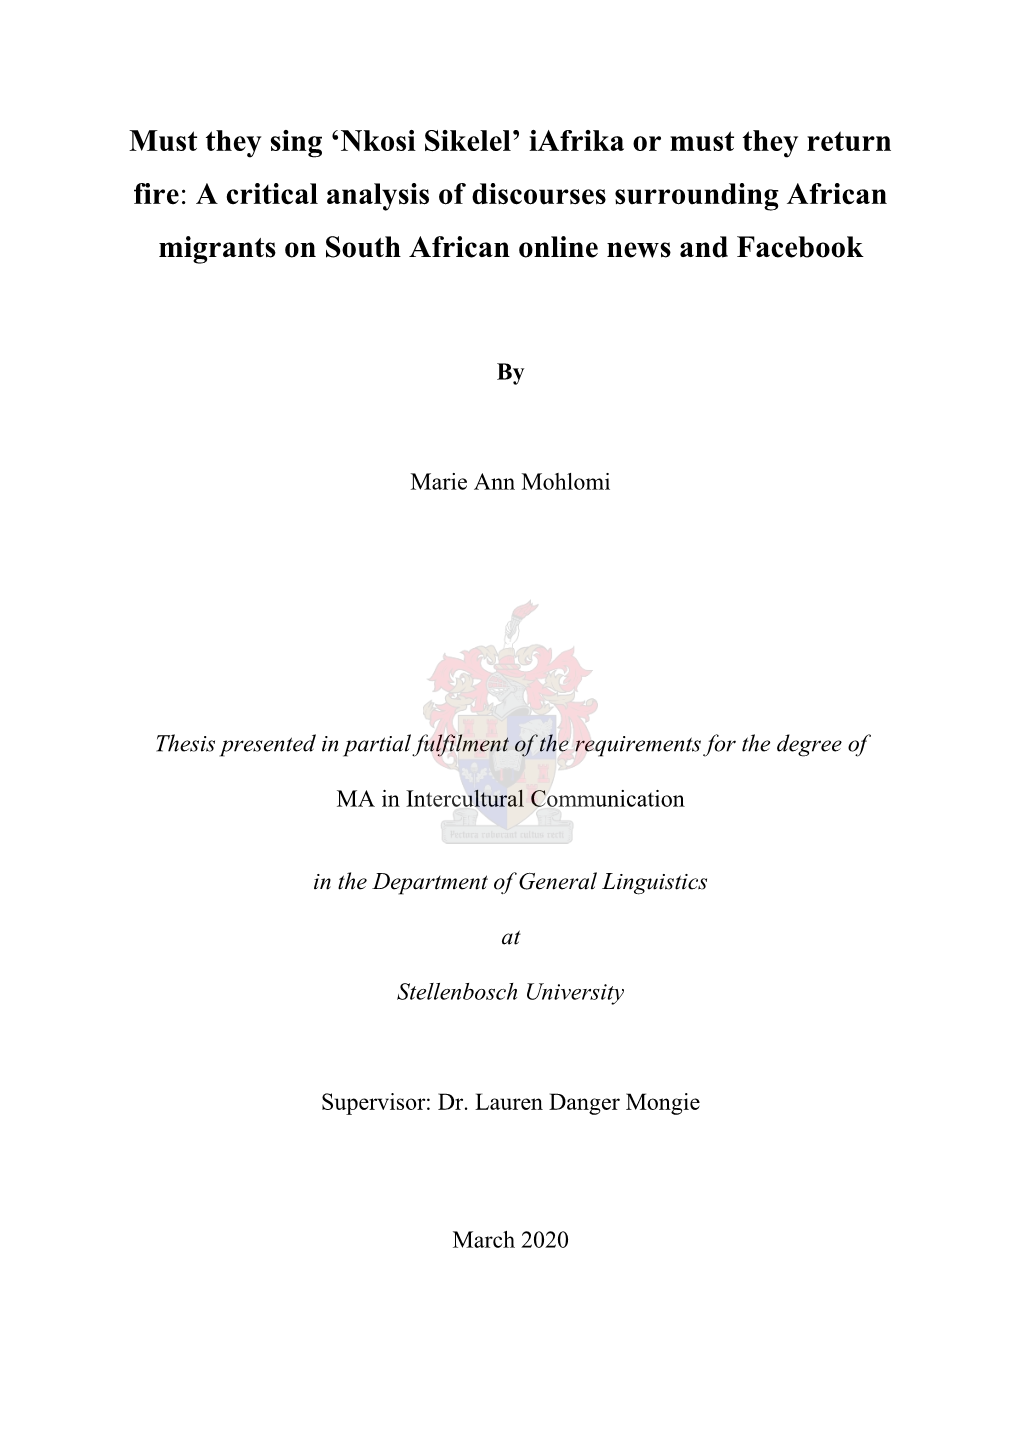 A Critical Analysis of Discourses Surrounding African Migrants on South African Online News and Facebook